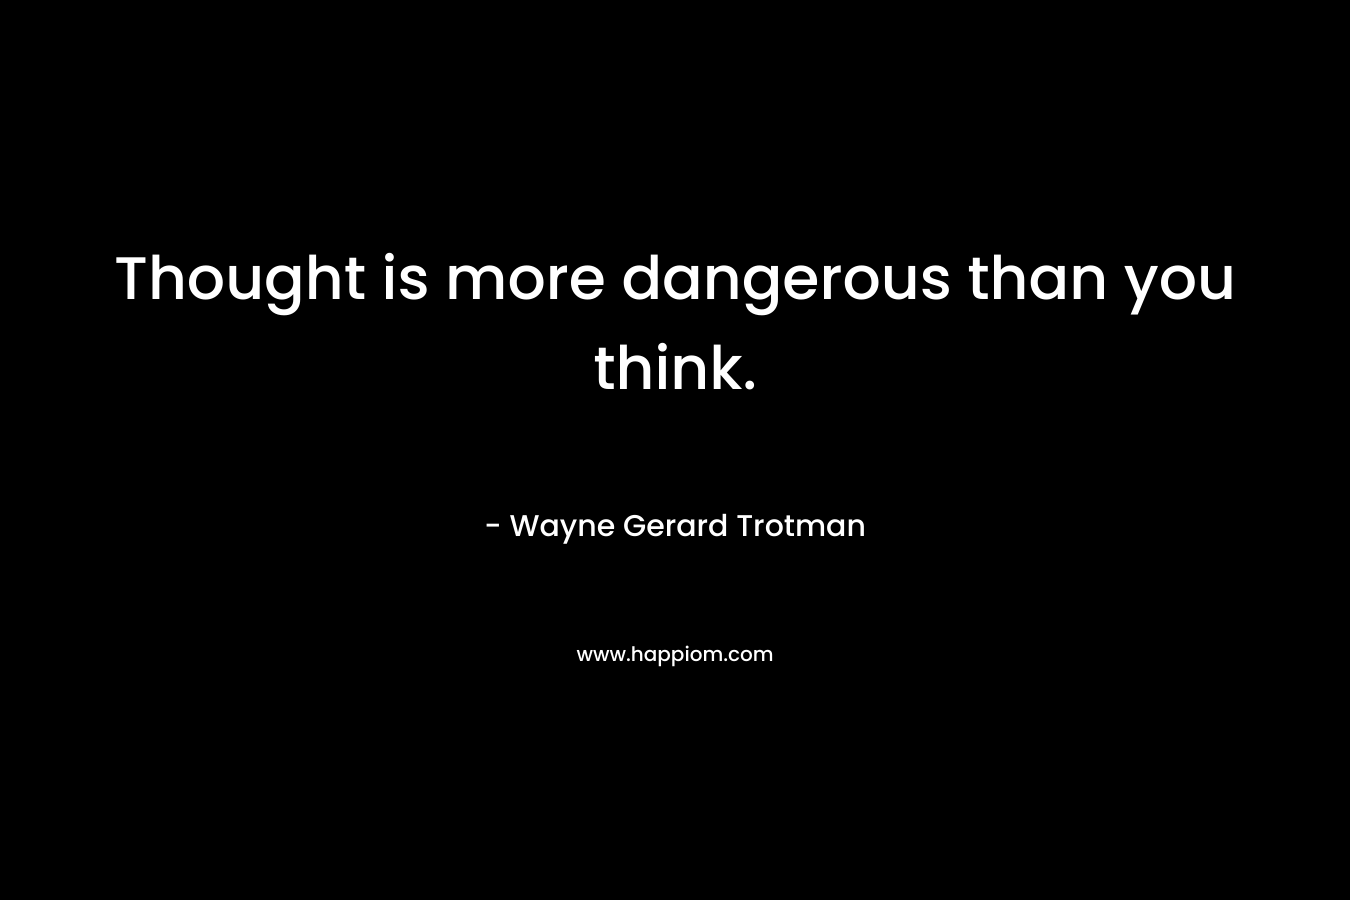 Thought is more dangerous than you think. – Wayne Gerard Trotman